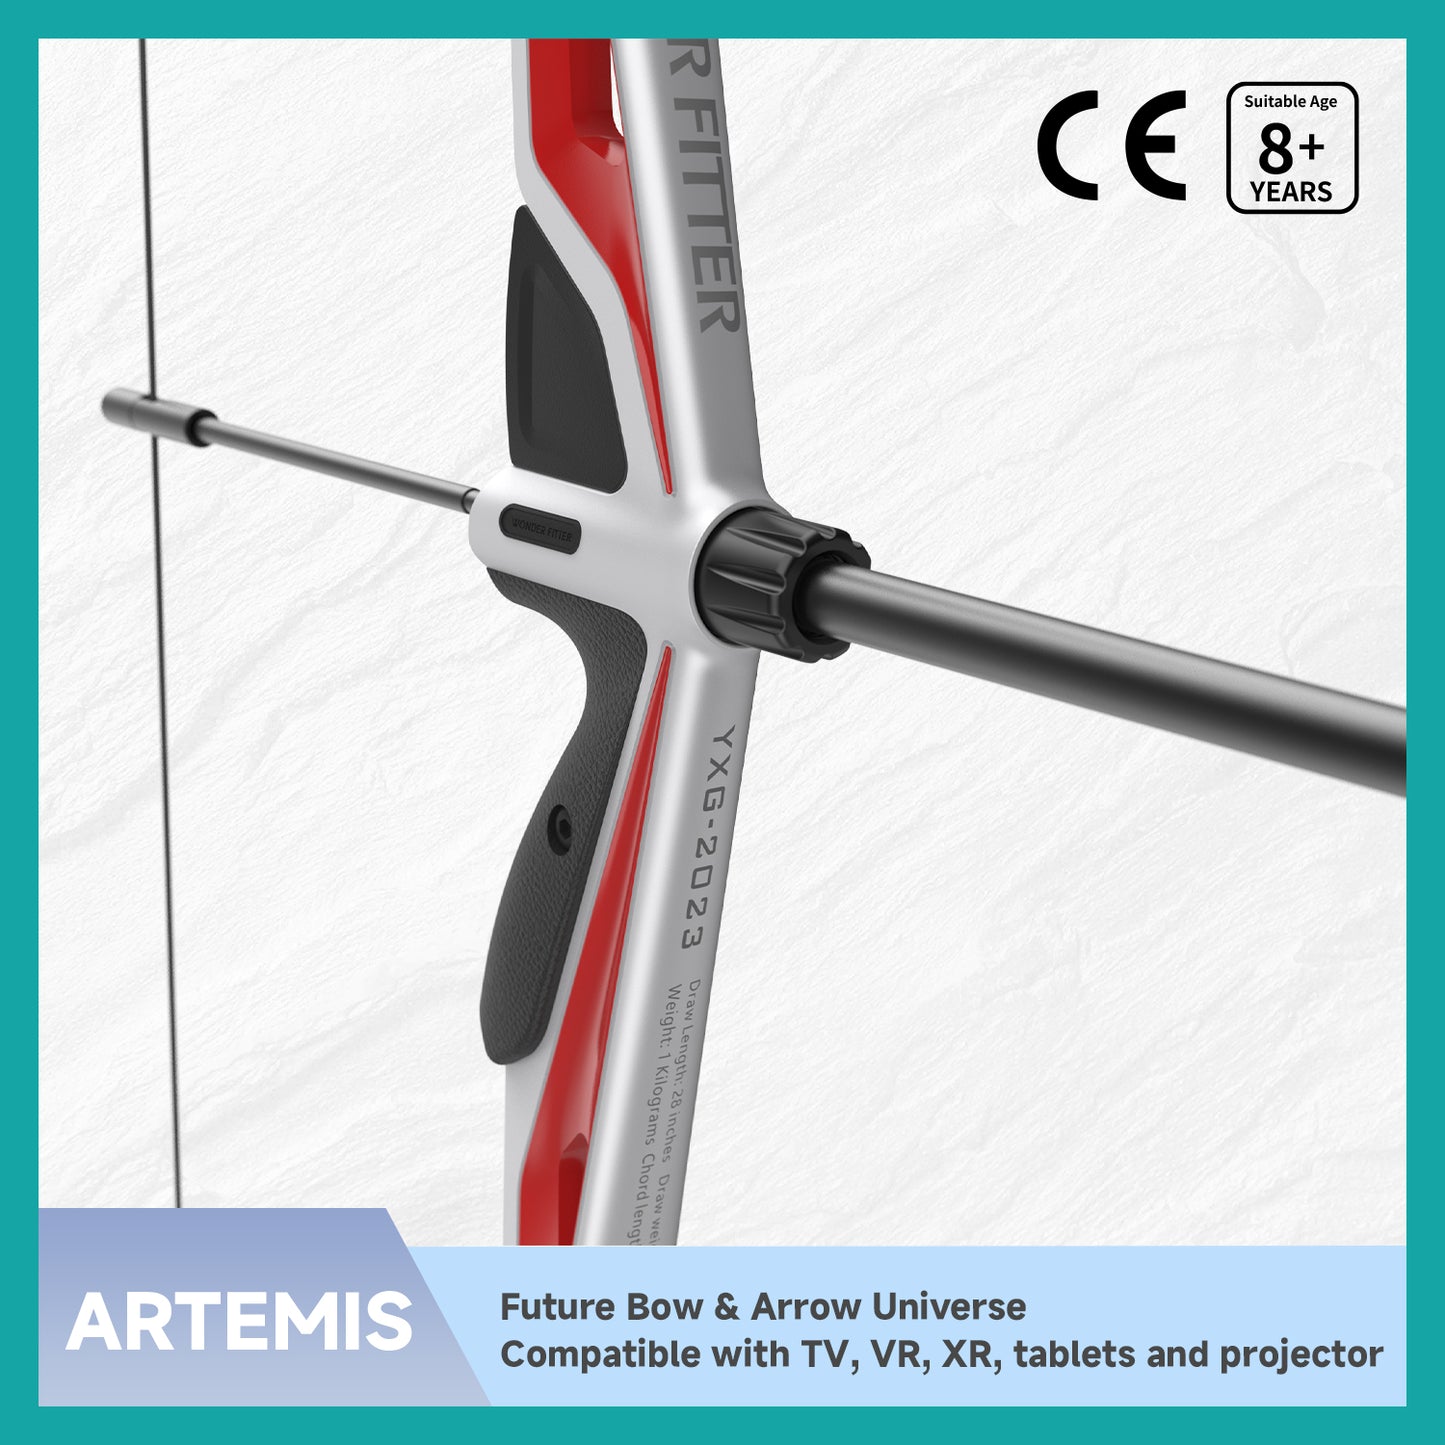 Artemis - The Ultimate Smart Gaming Bow